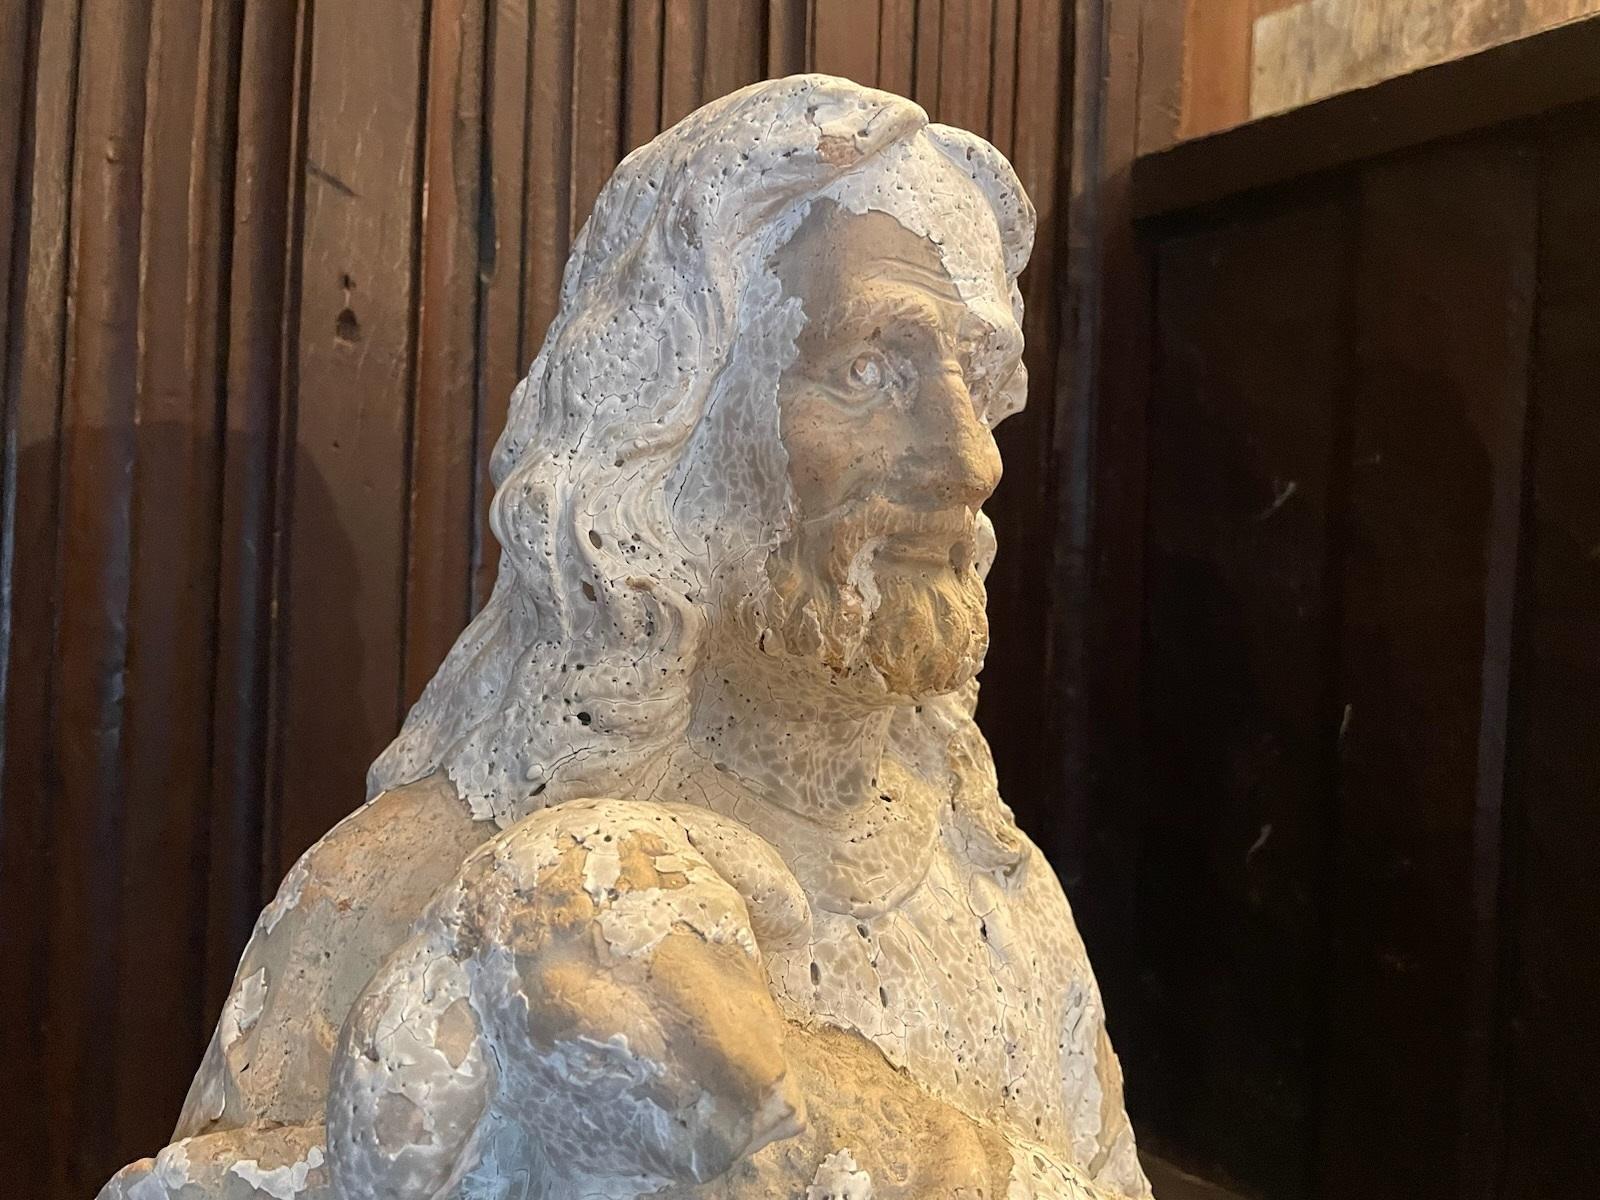 Religious sculpture of a bearded Christ holding a lamb. This beautiful sculpture is made from terracotta with a layer of gesso. The sculpture is in distressed condition with the layer of gesso flaked off in areas which gives the sculpture some